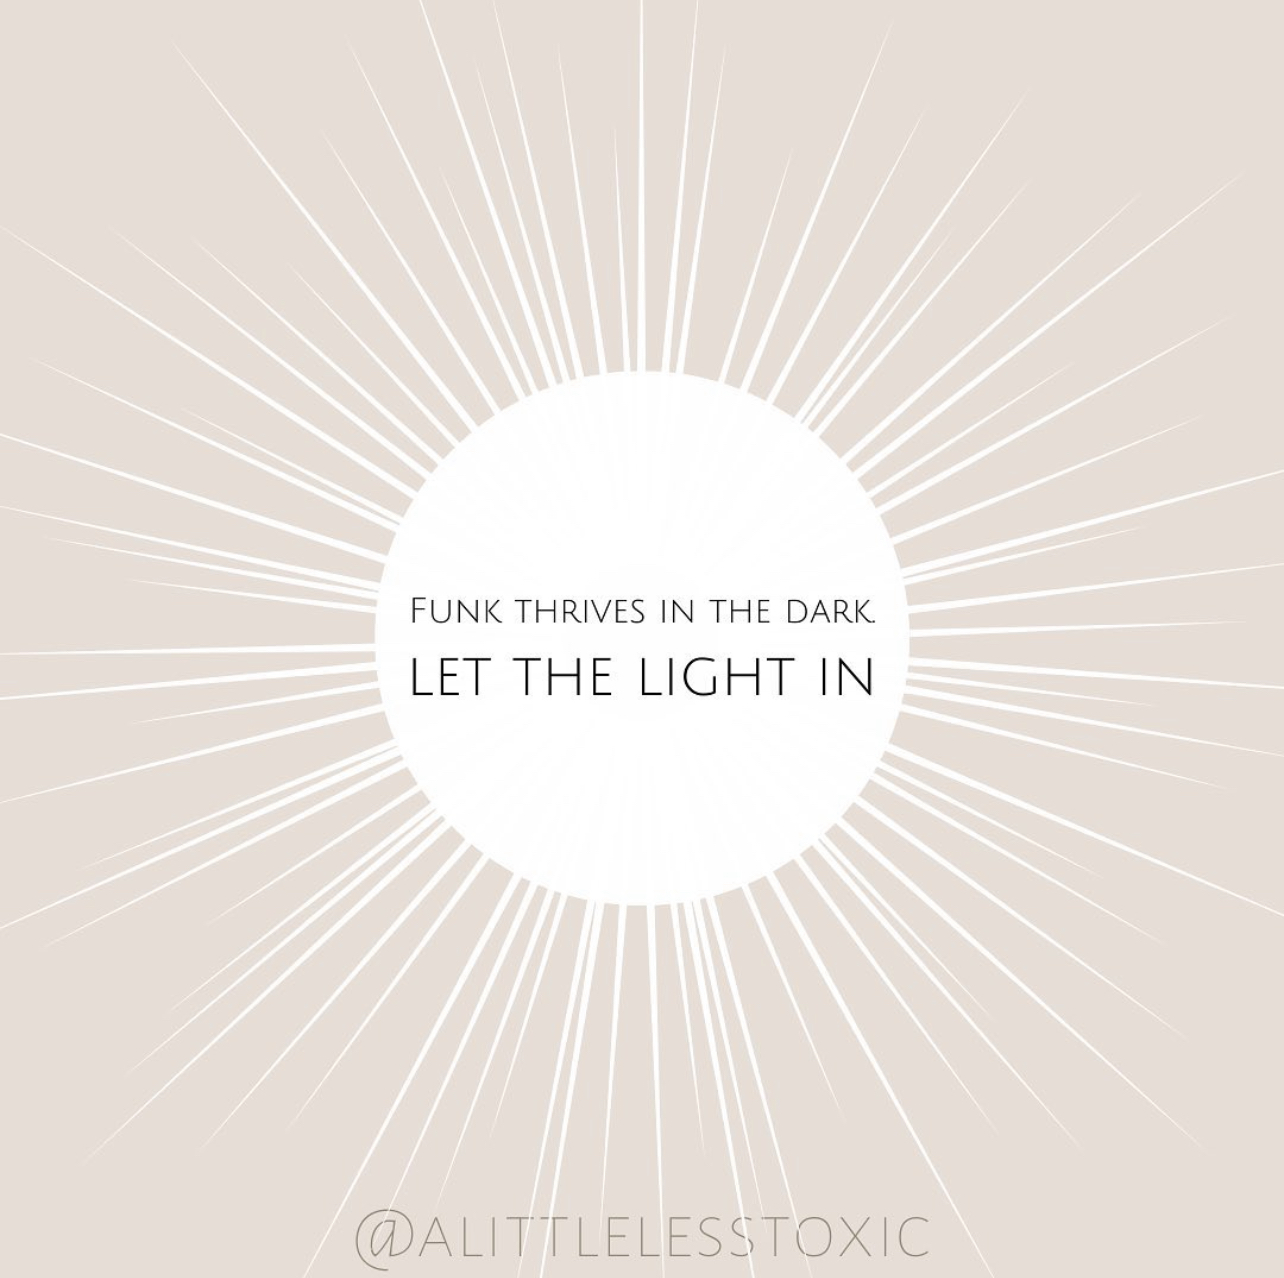 Let the Light In